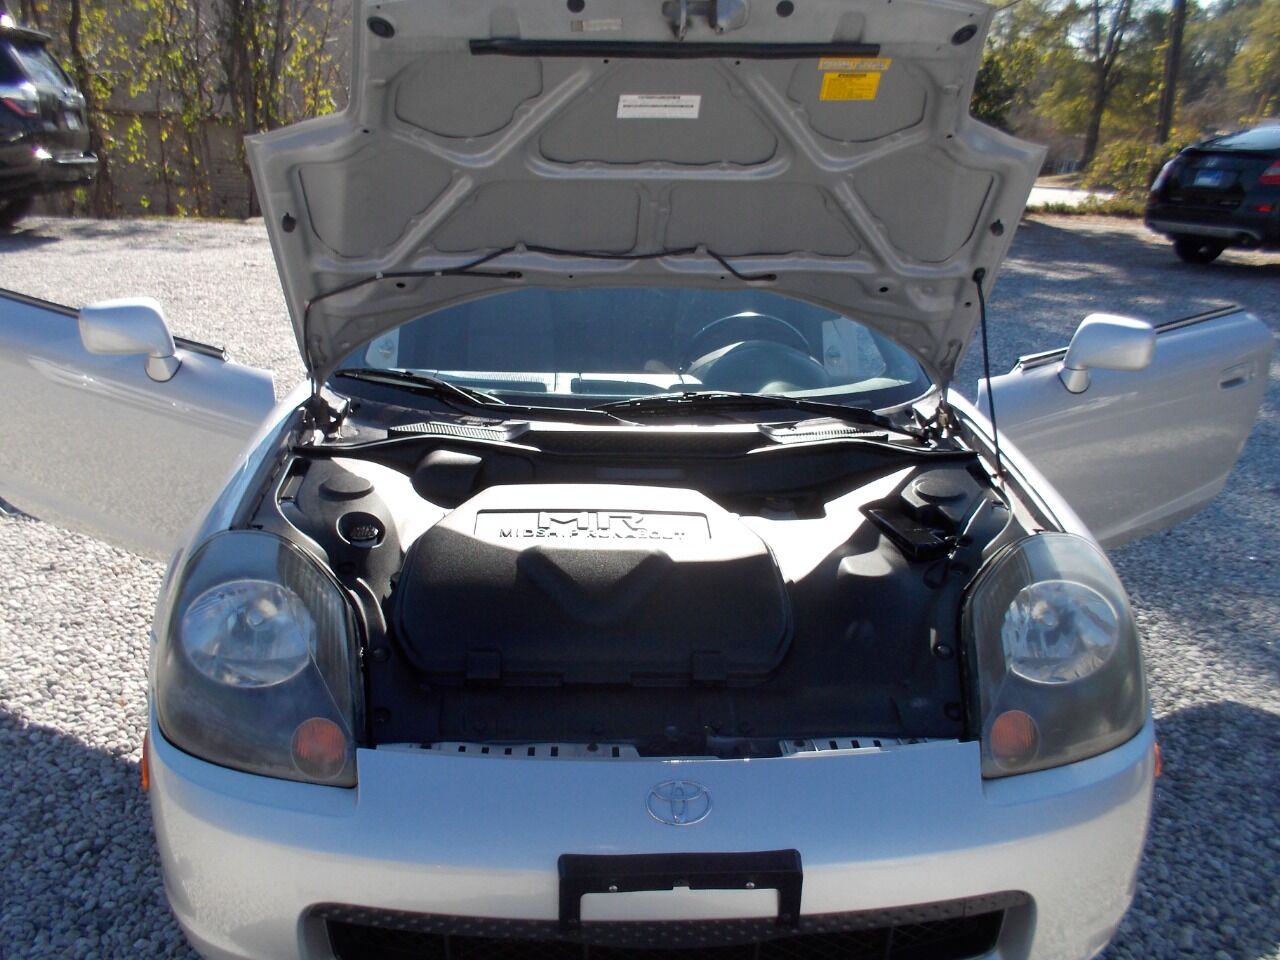 Preowned 2001 TOYOTA MR2 Base 2dr Convertible for sale by Carolina Auto Connection in Spartanburg, SC